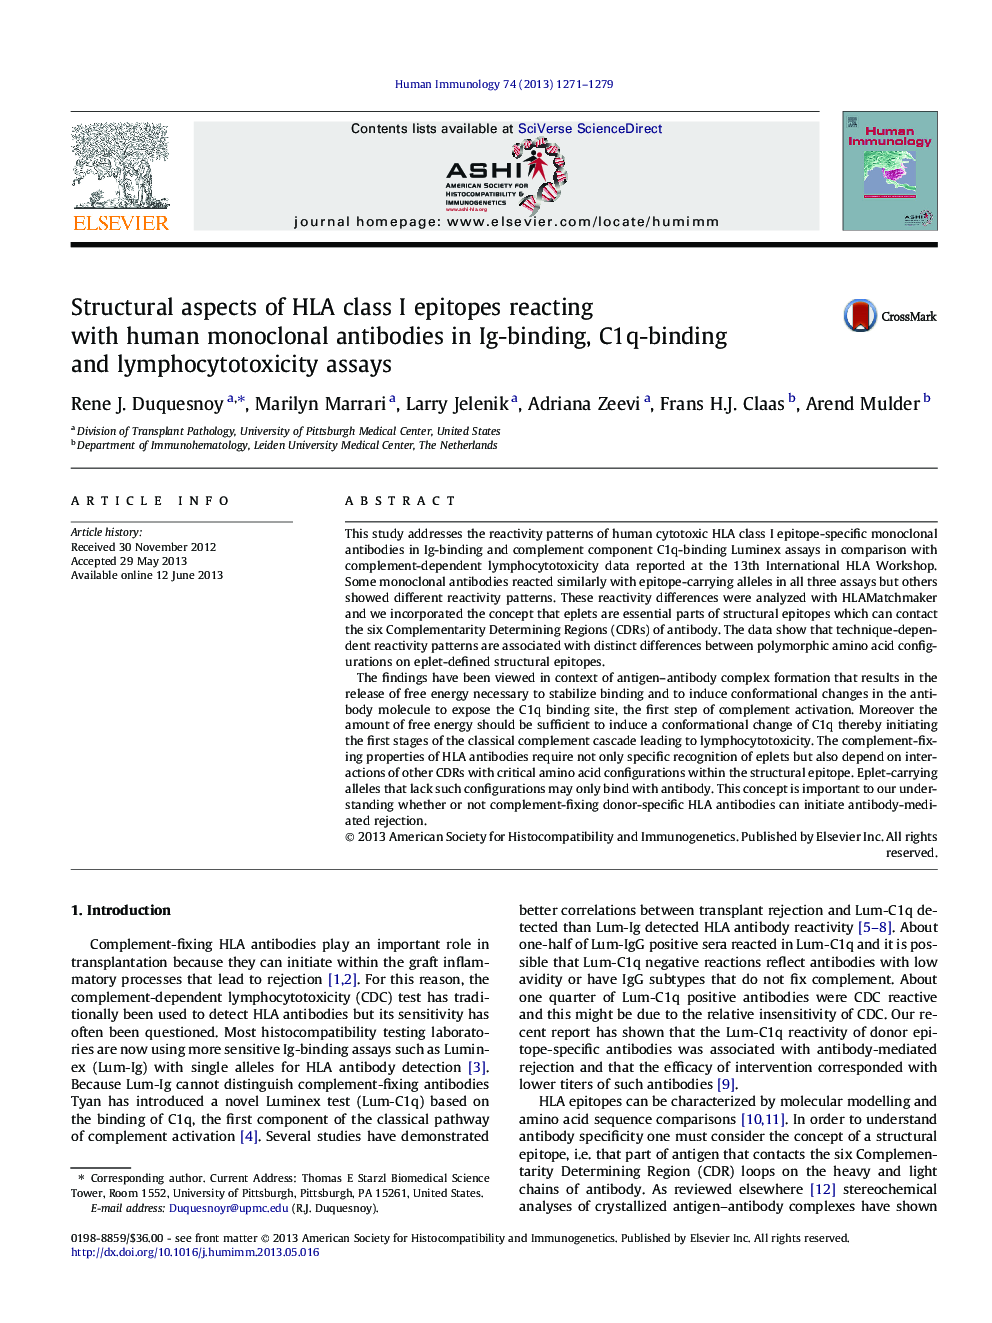 Structural aspects of HLA class I epitopes reacting with human monoclonal antibodies in Ig-binding, C1q-binding and lymphocytotoxicity assays